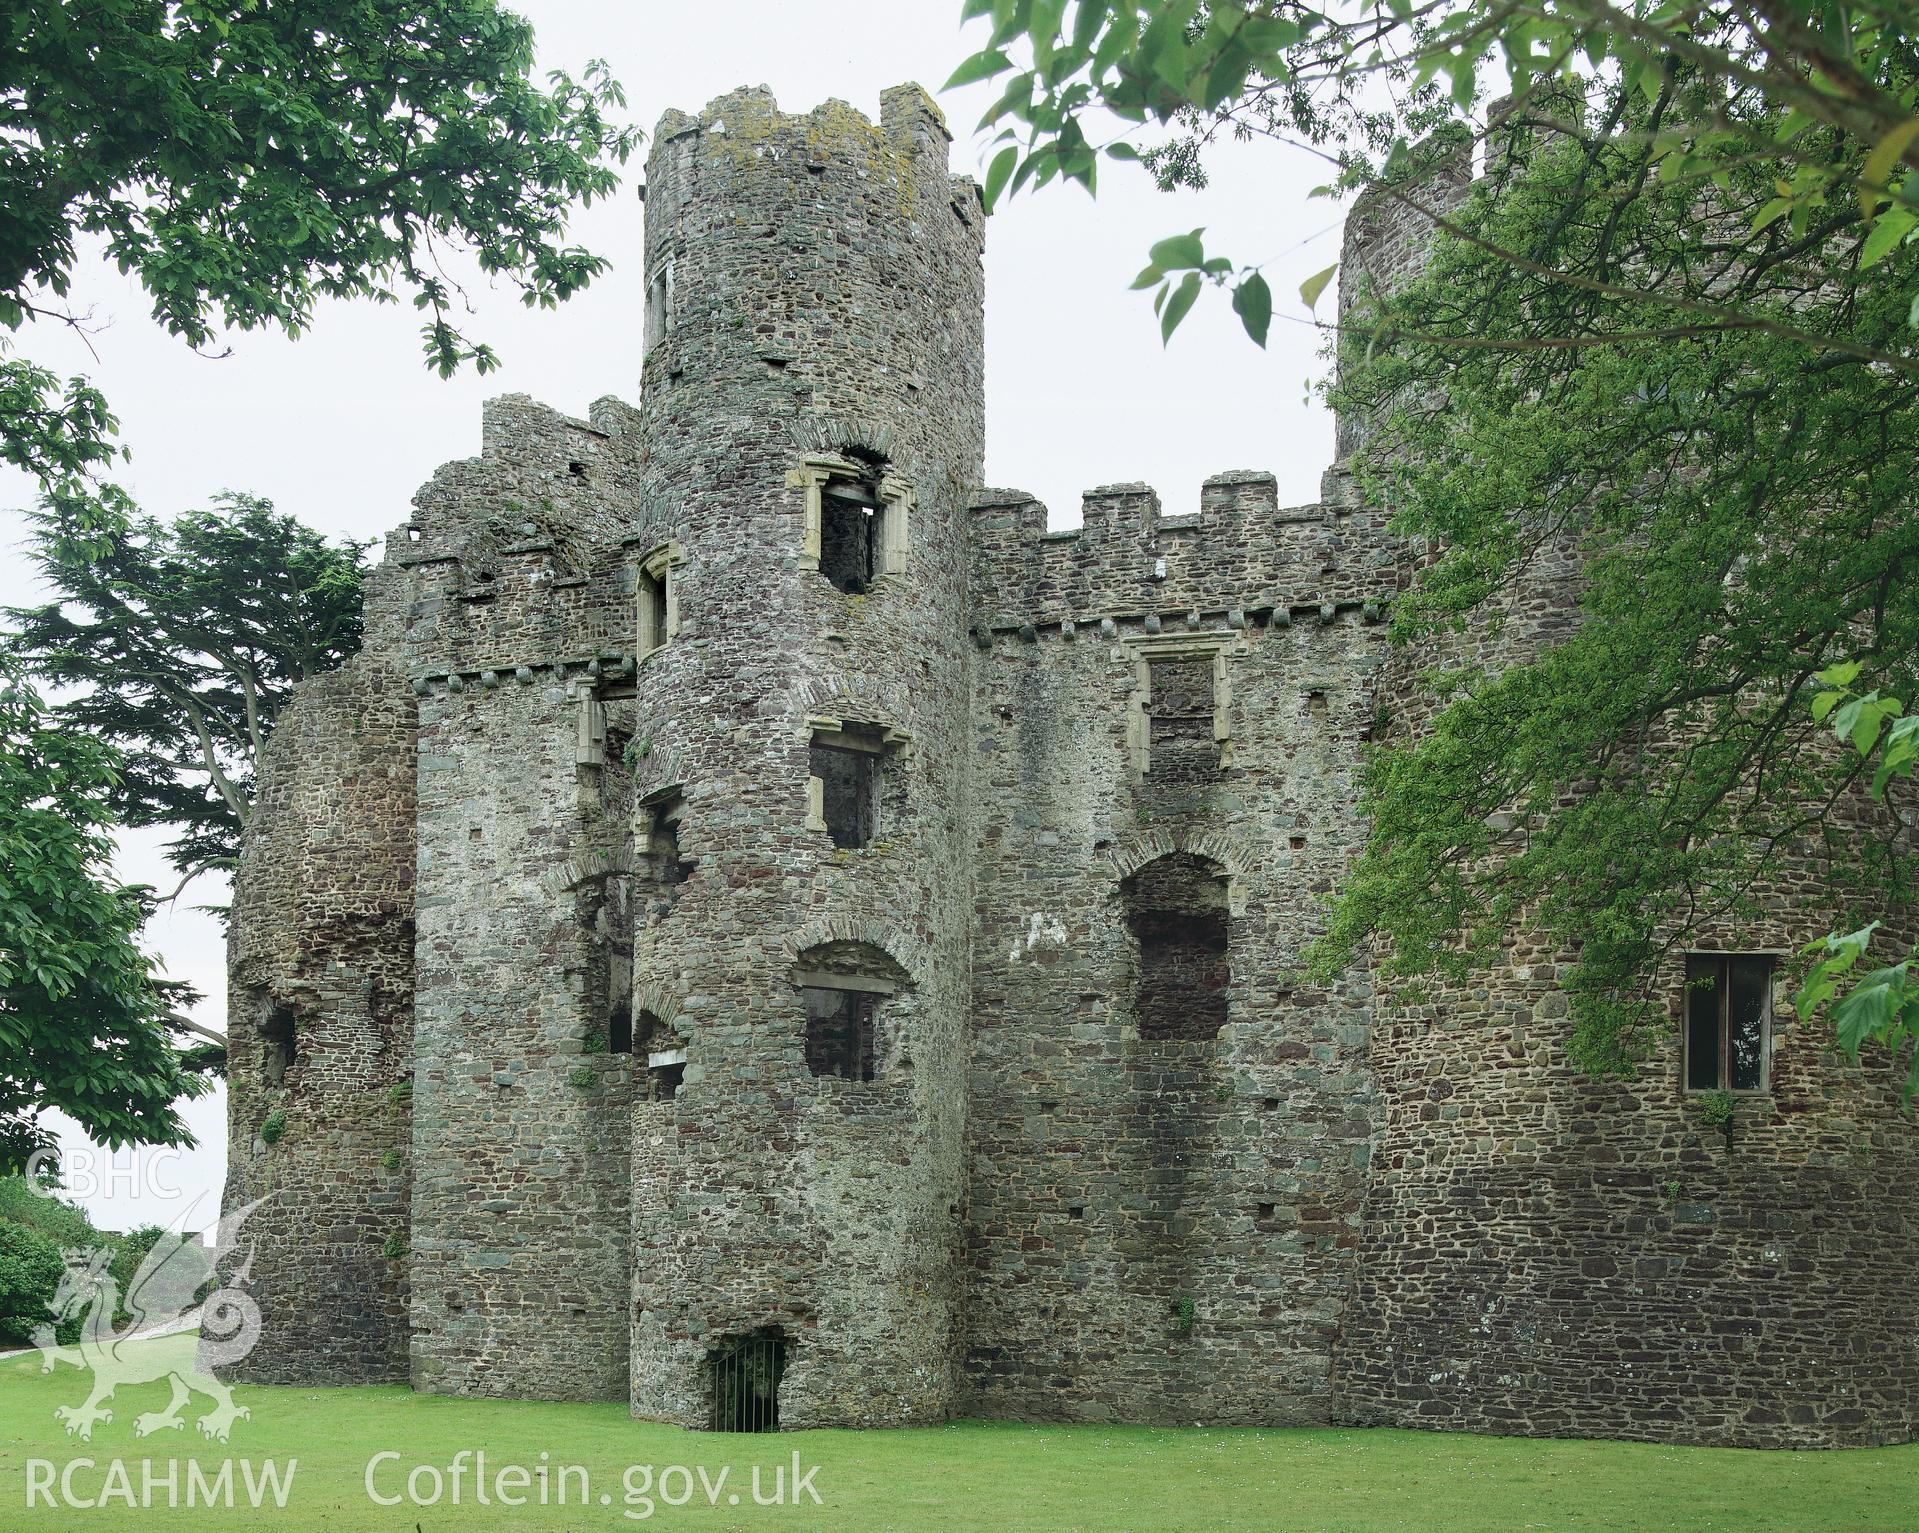 RCAHMW colour transparency showing view of Laugharne Castle.